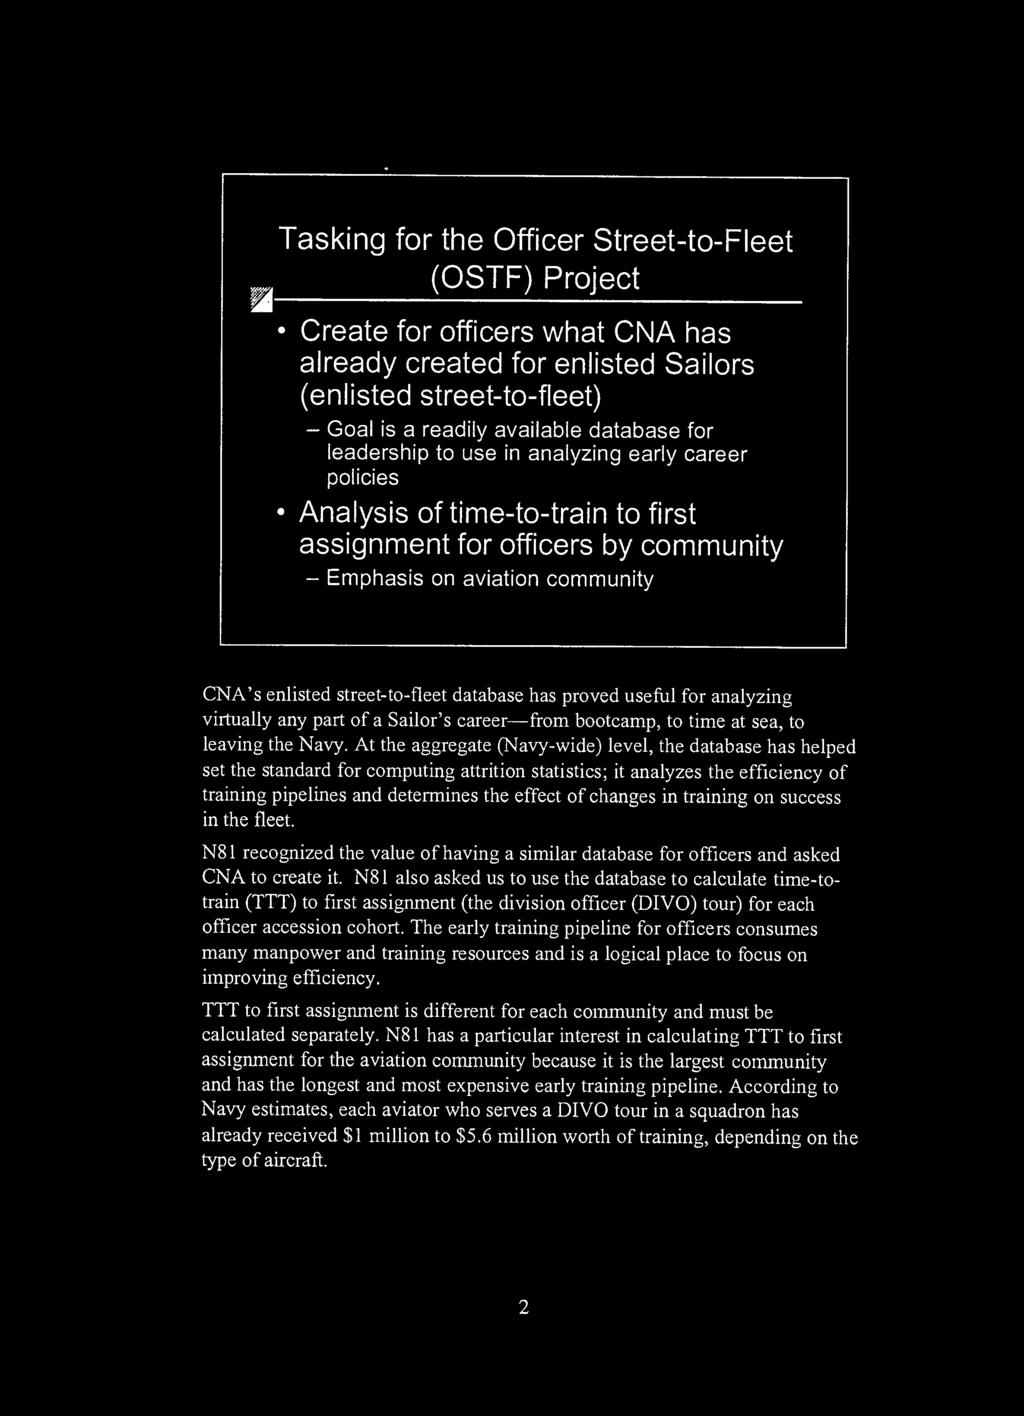 Tasking for the Officer Street-to-Fleet (OSTF) Project m Create for officers what CNA has already created for enlisted Sailors (enlisted street-to-fleet) - Goal is a readily available database for